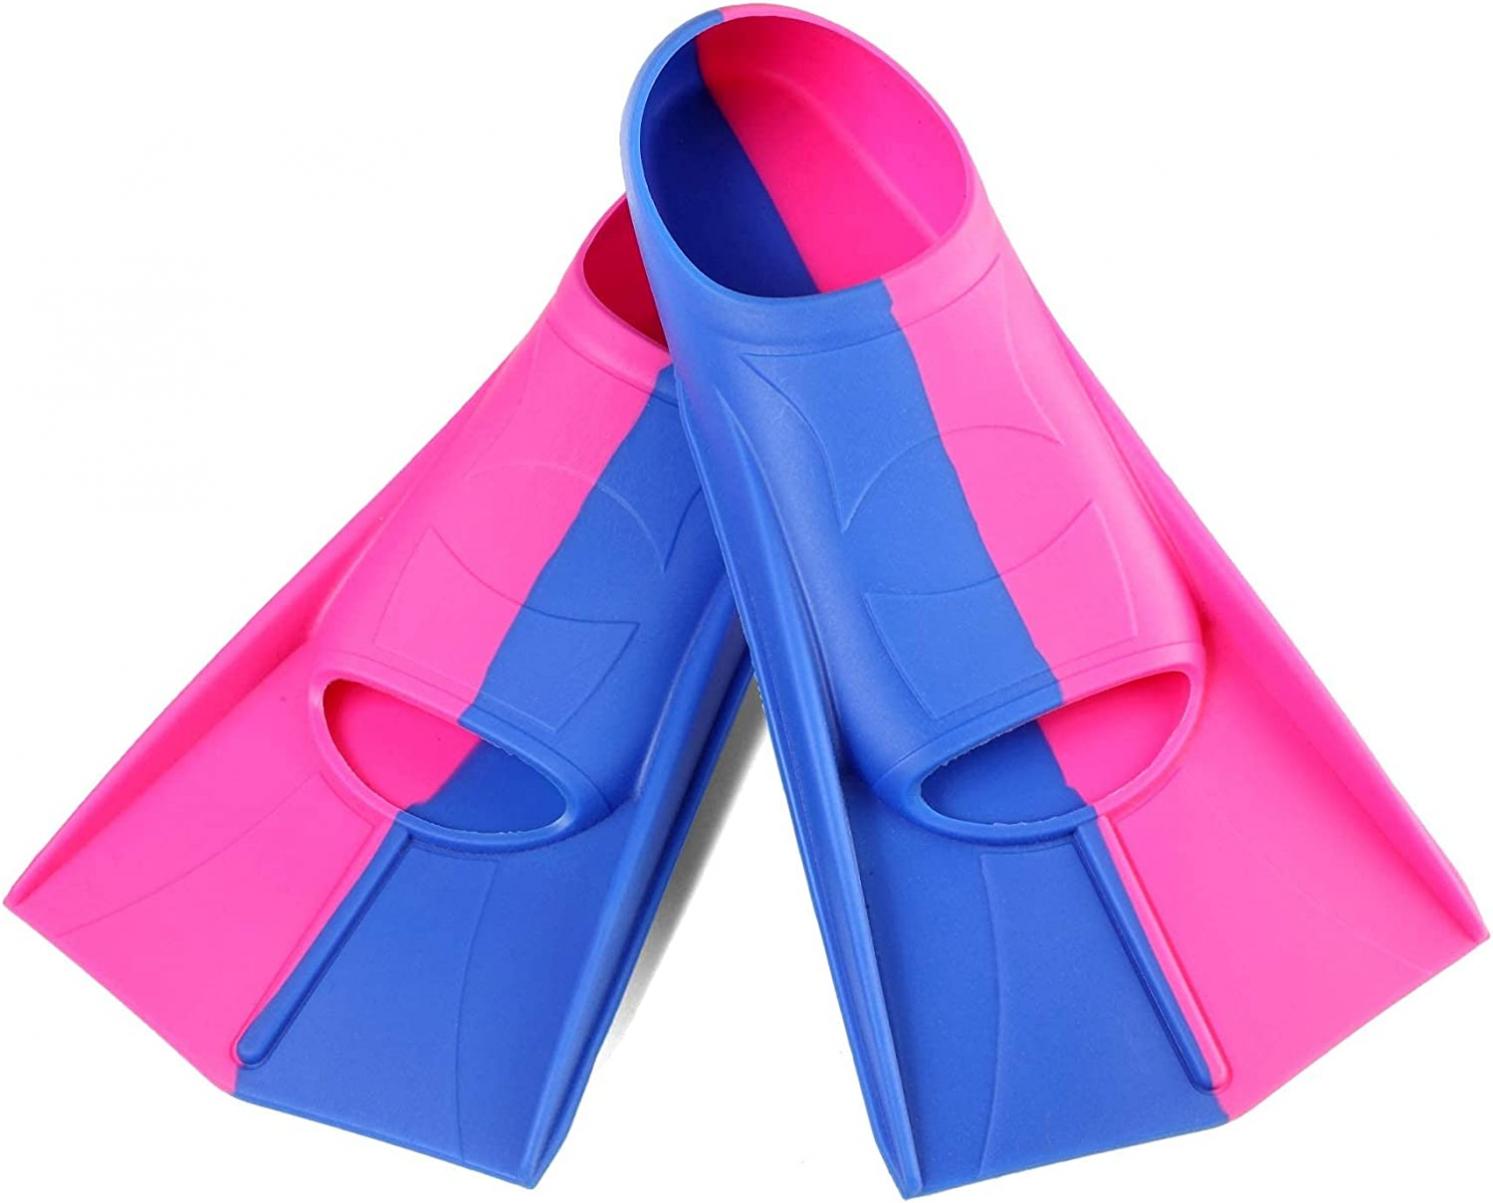 Foyinbet Swim Fins,Short Swimming Training Flippers for Lap Swimming Snorkeling,Silicone Swim Flippers with Mesh Bag for Kids,Girls,Boys Youth Women Men